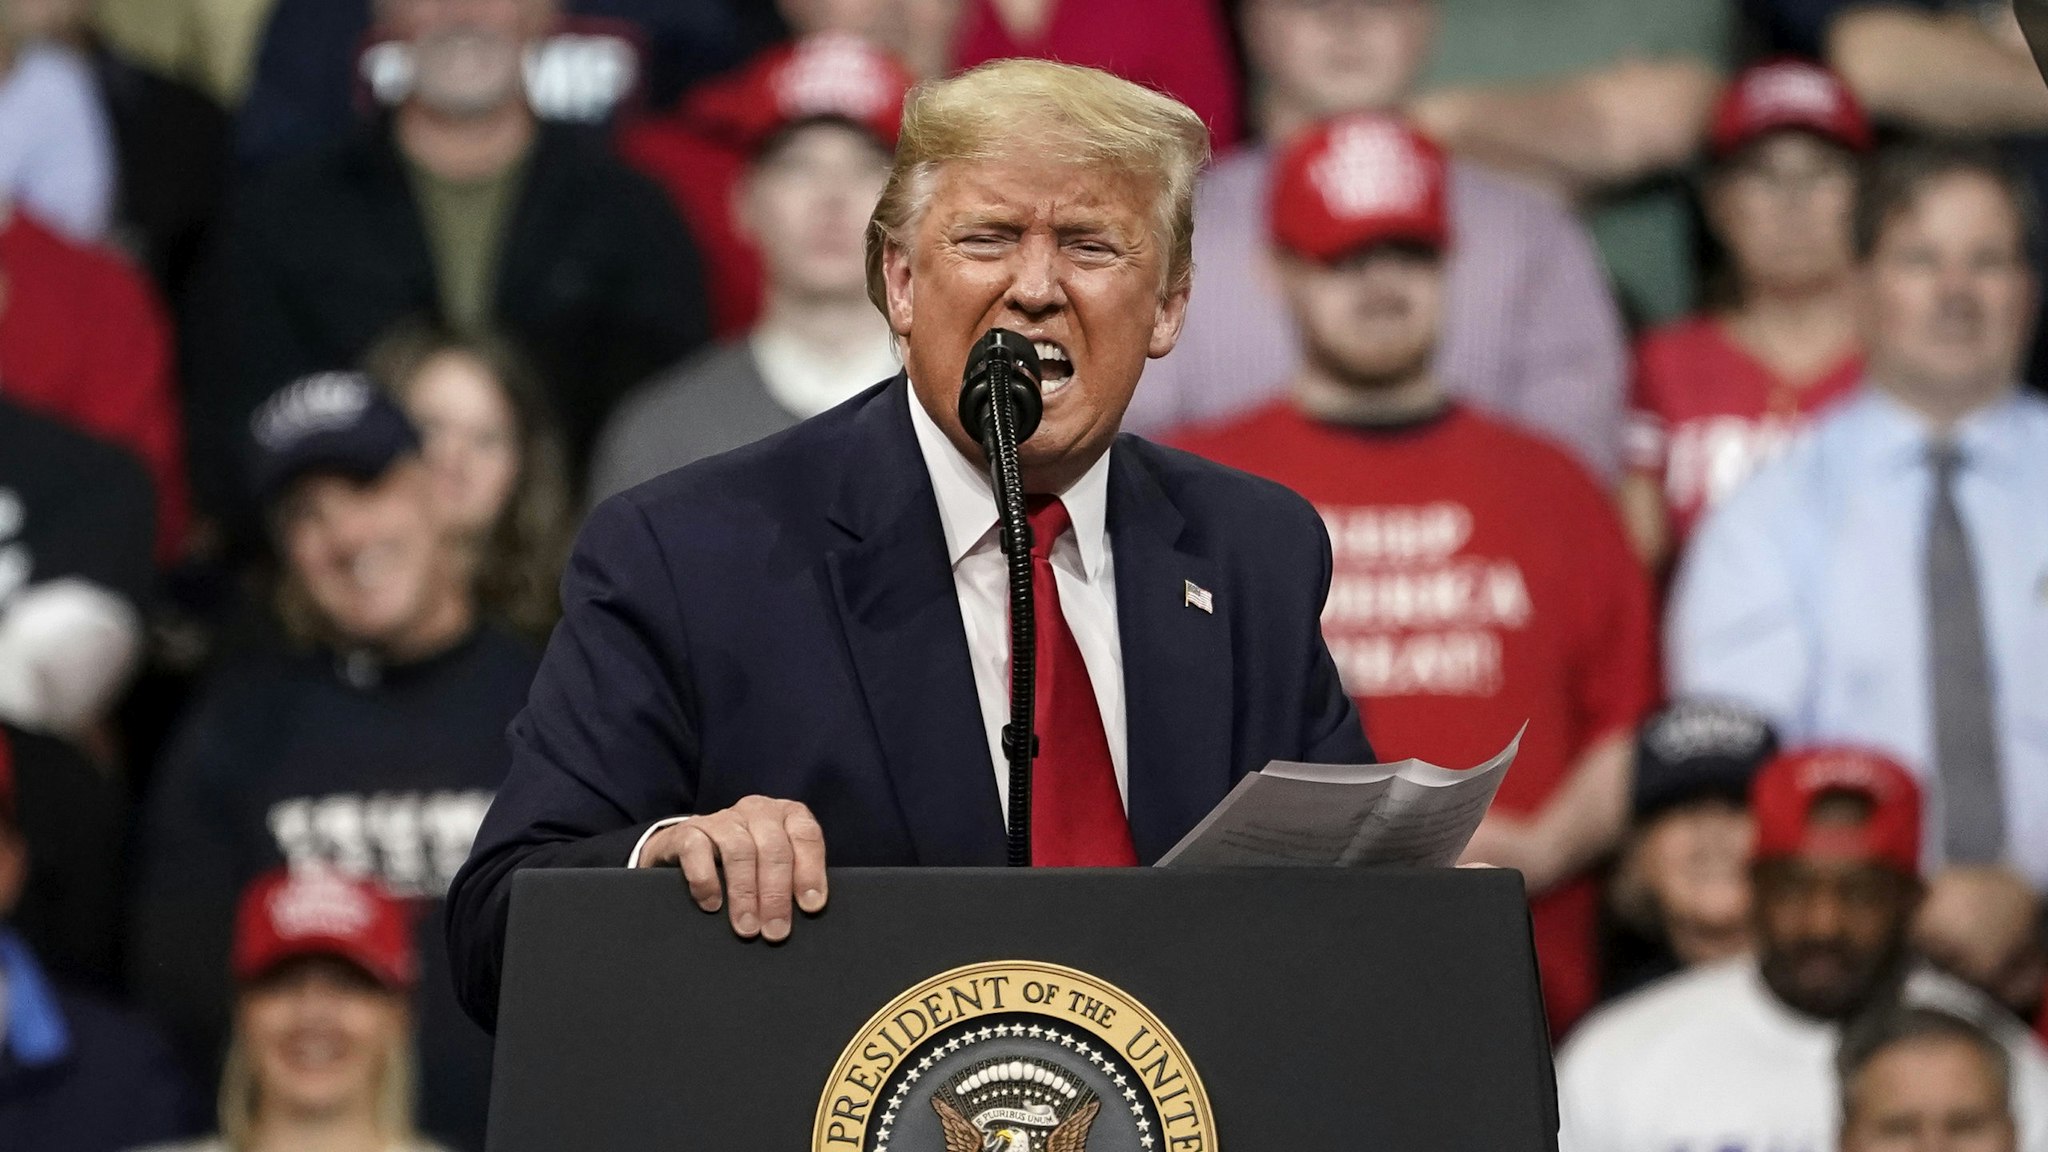 MANCHESTER, NH - FEBRUARY 10: U.S. President Donald Trump speaks at a rally at Southern New Hampshire University Arena on February 10, 2020 in Manchester, New Hampshire. New Hampshire holds its first-in-the-nation primary tomorrow.